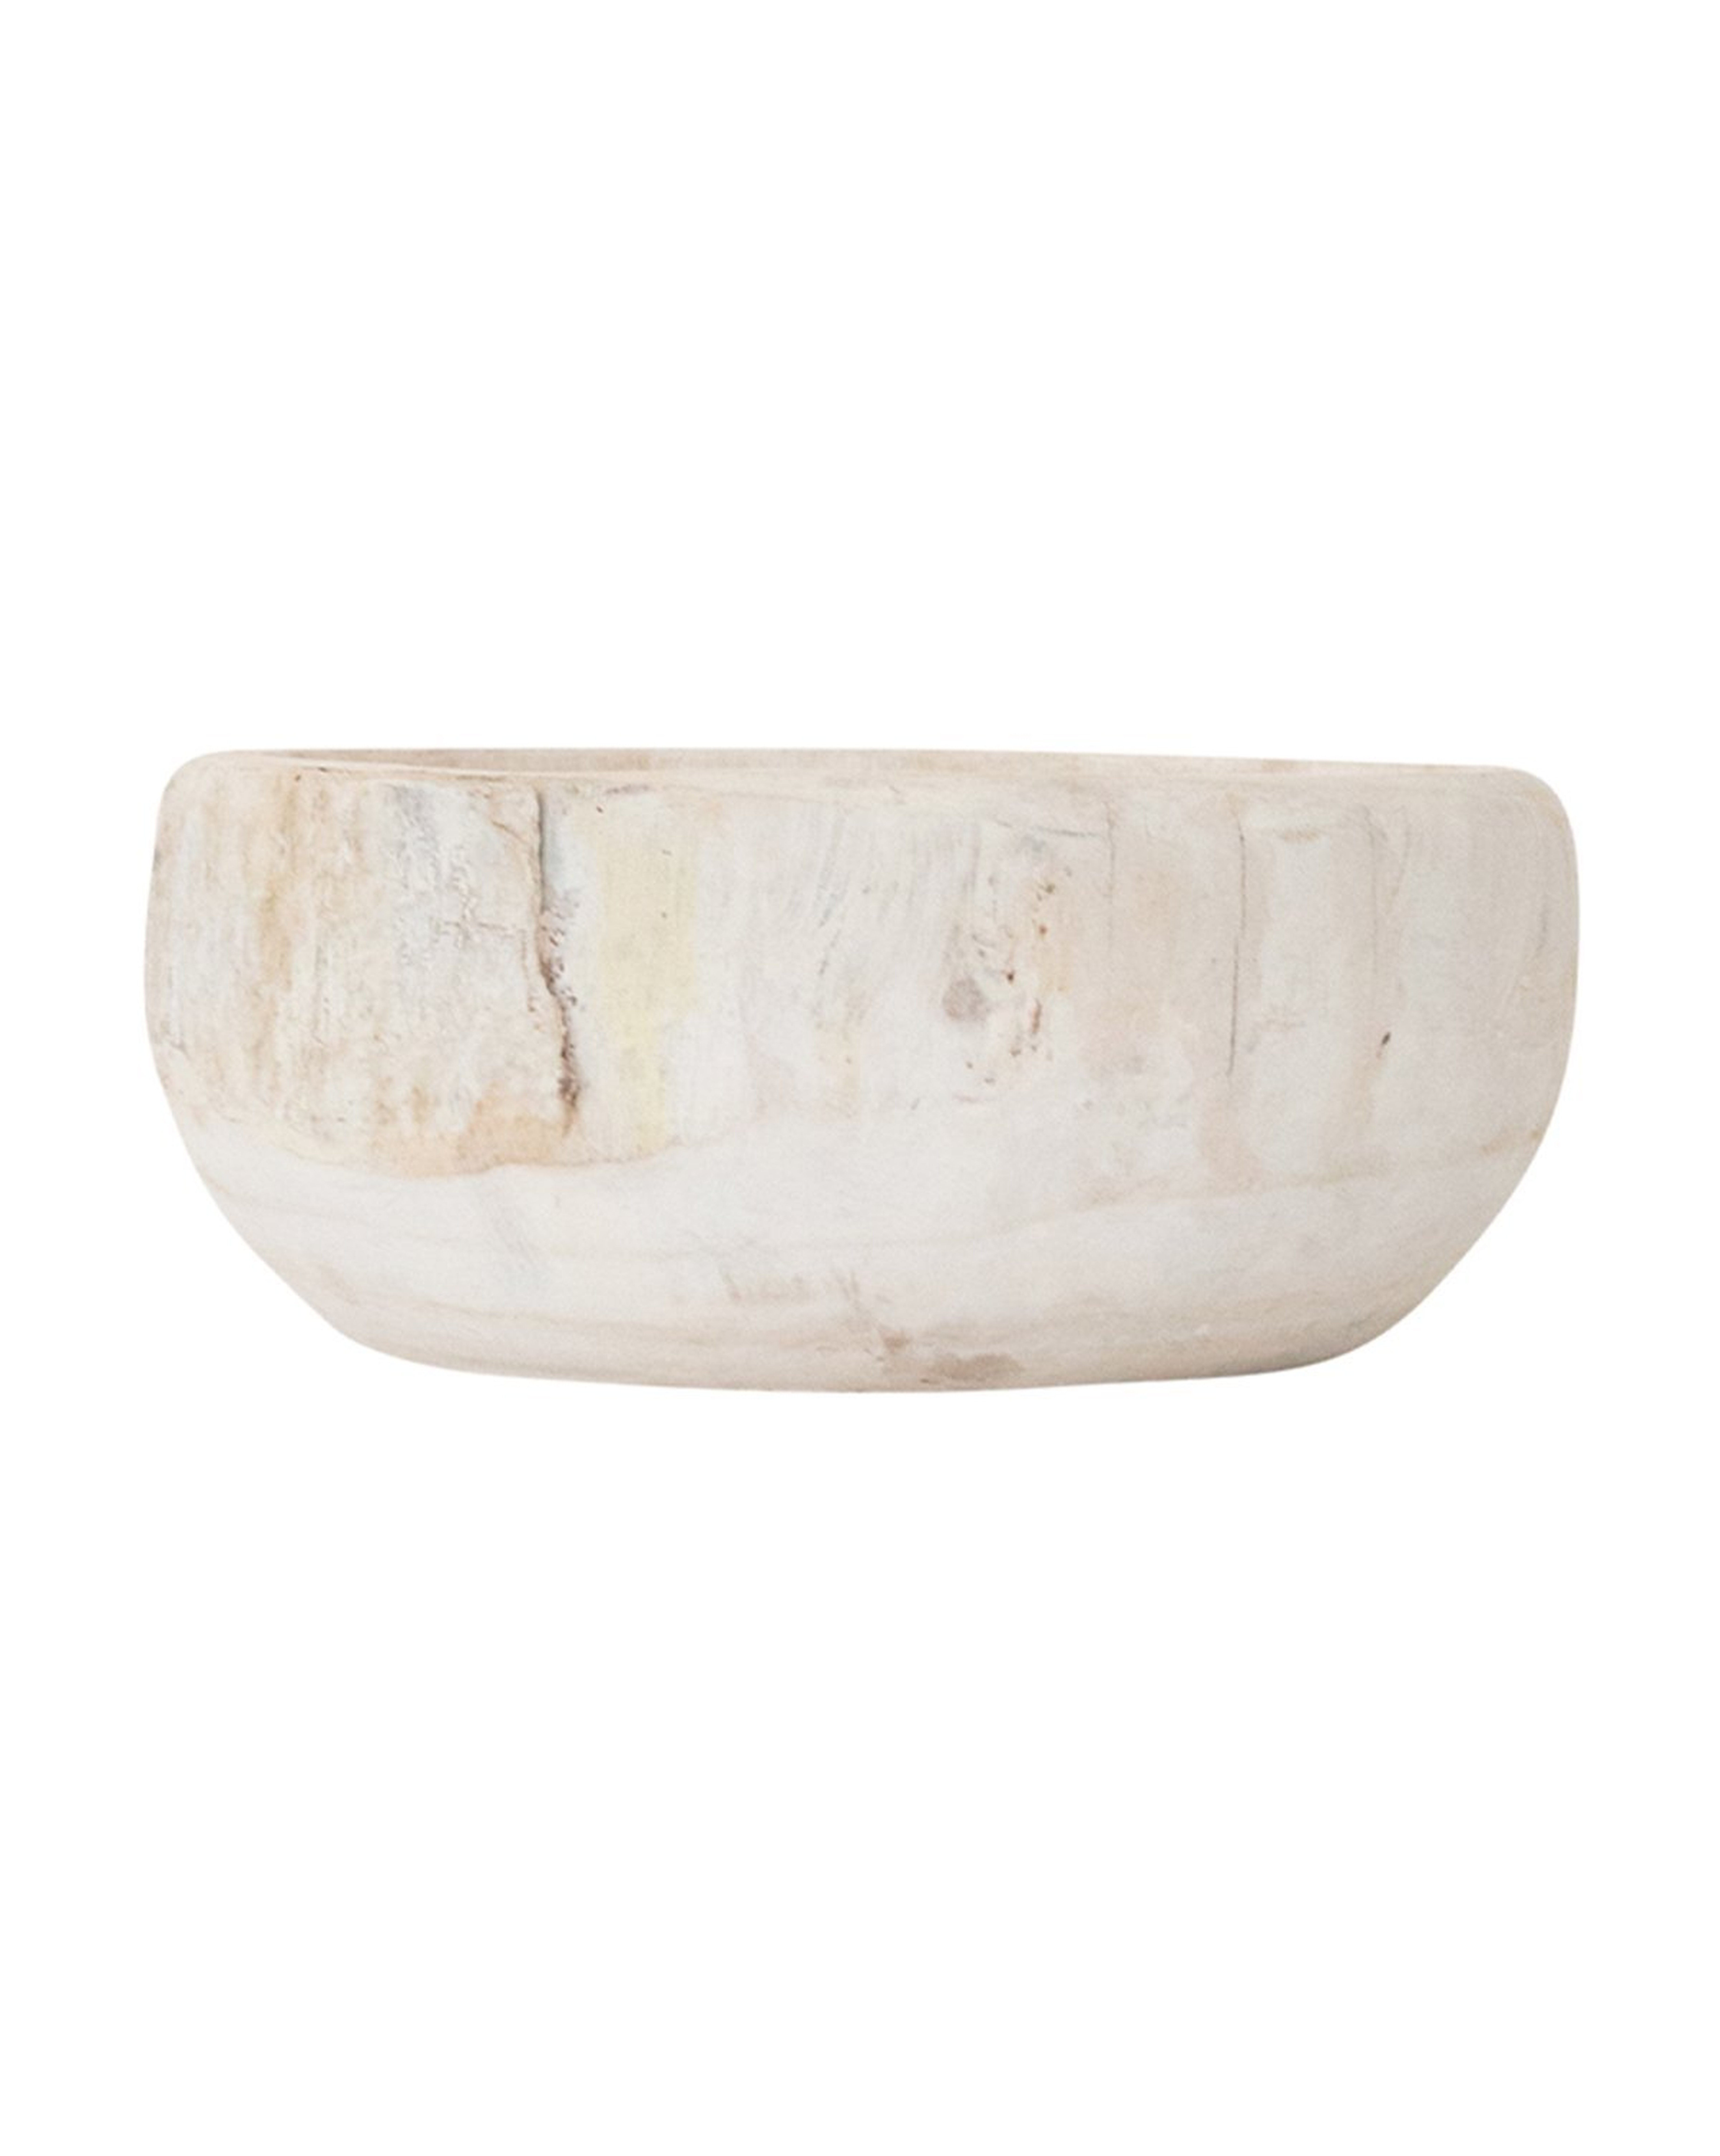 WHITEWASHED WOODEN BOWL - McGee & Co.